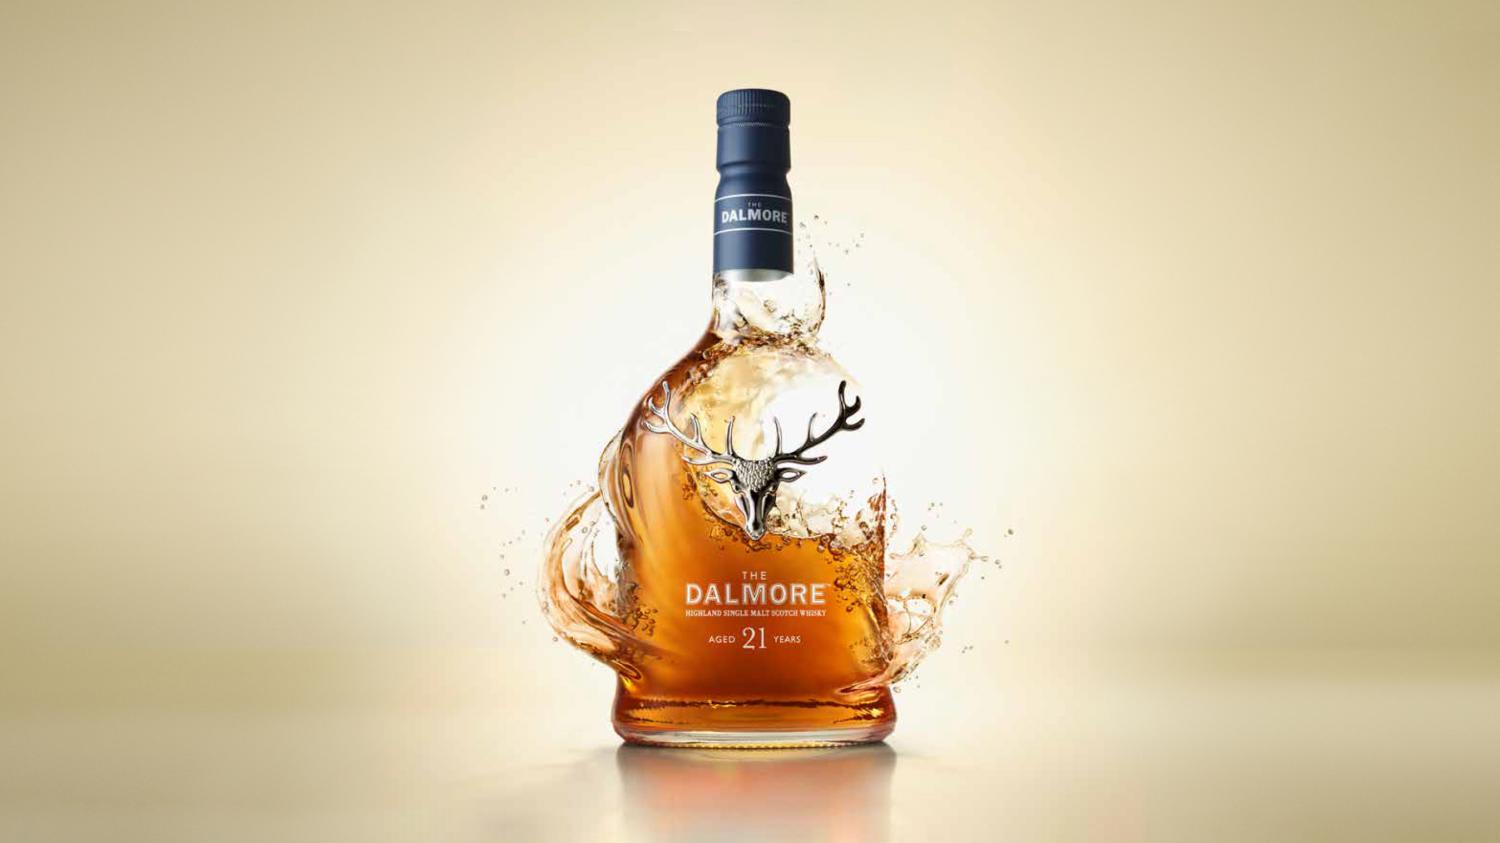 The Dalmore 21 Year Old heralds the gathering of fine labels under a new stewardship 